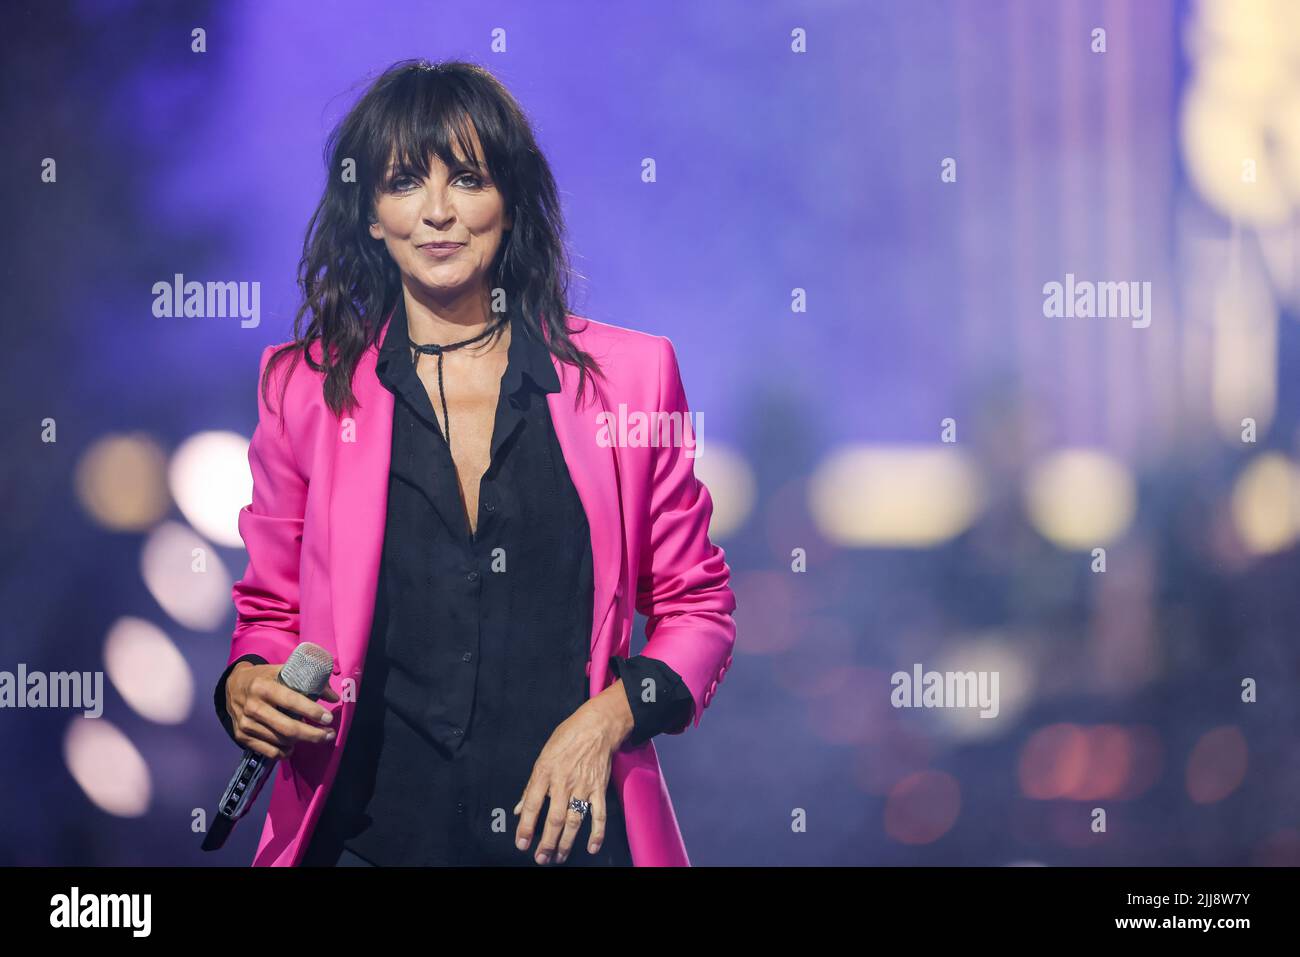 Leipzig, Germany. 23rd July, 2022. Singer Nena is on stage in the show ...